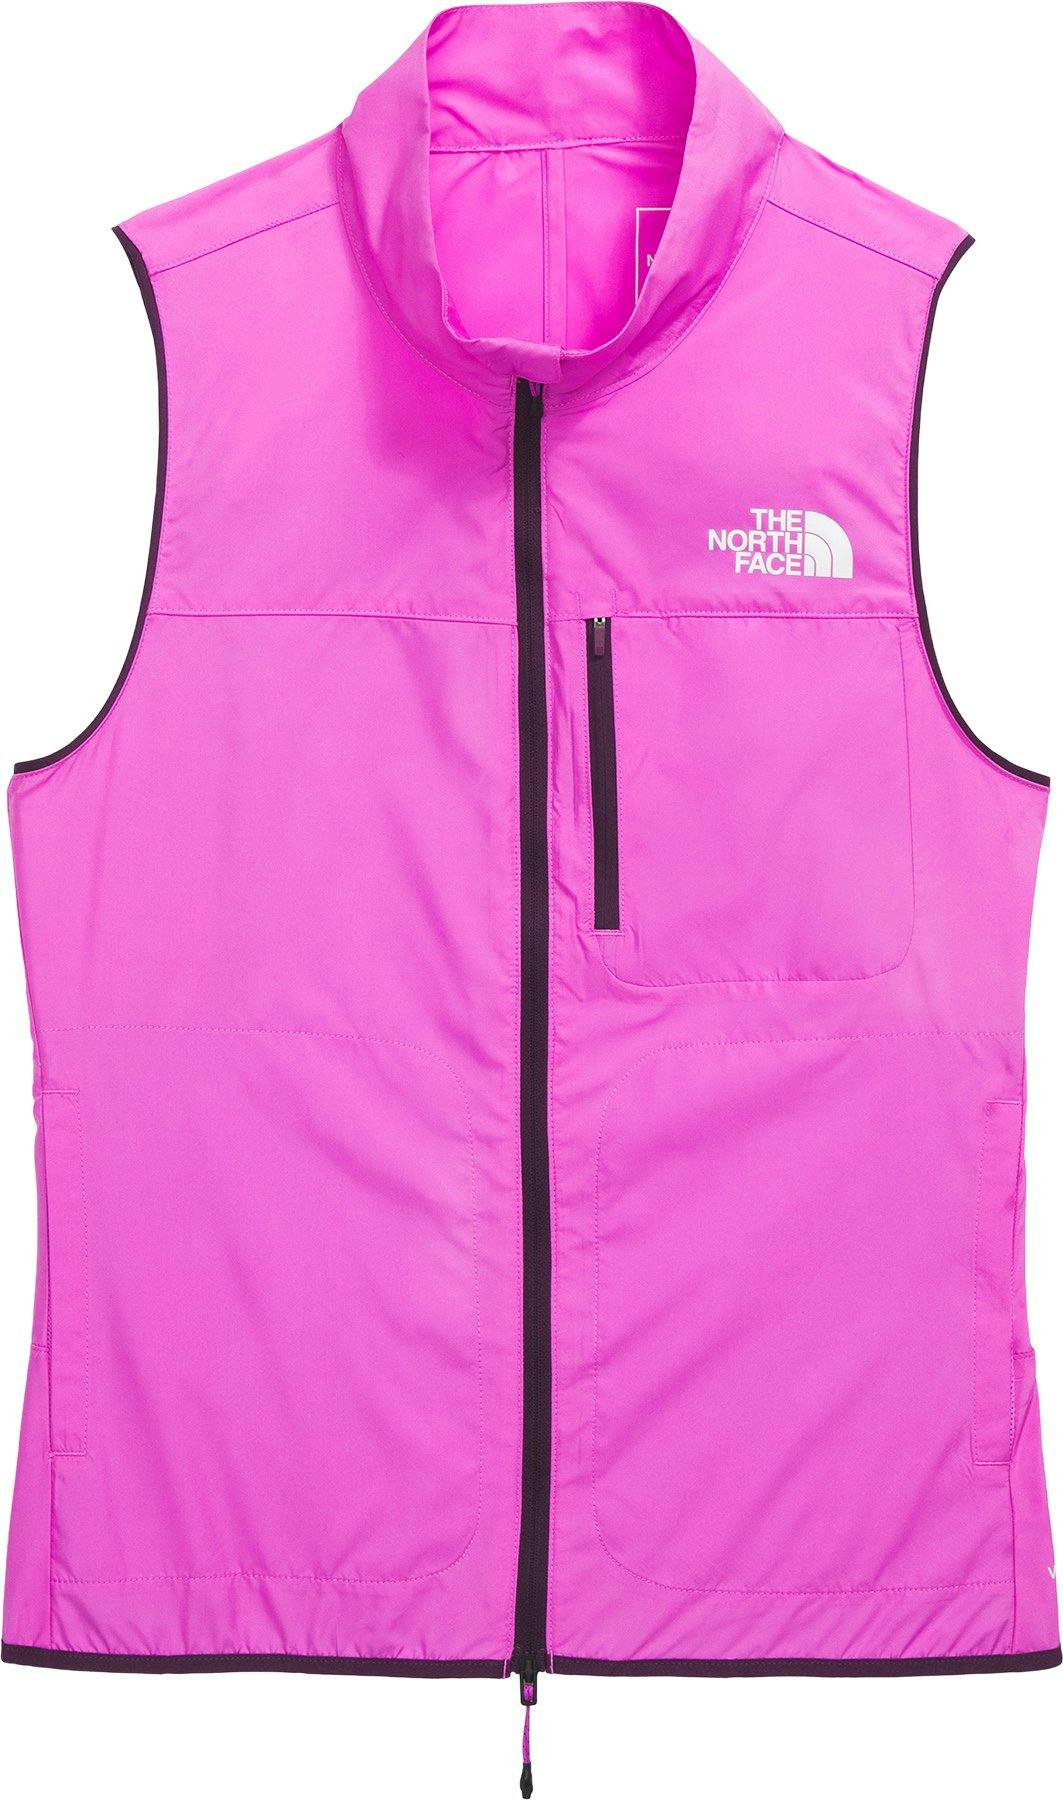 Product image for Higher Run Wind Vest - Women's